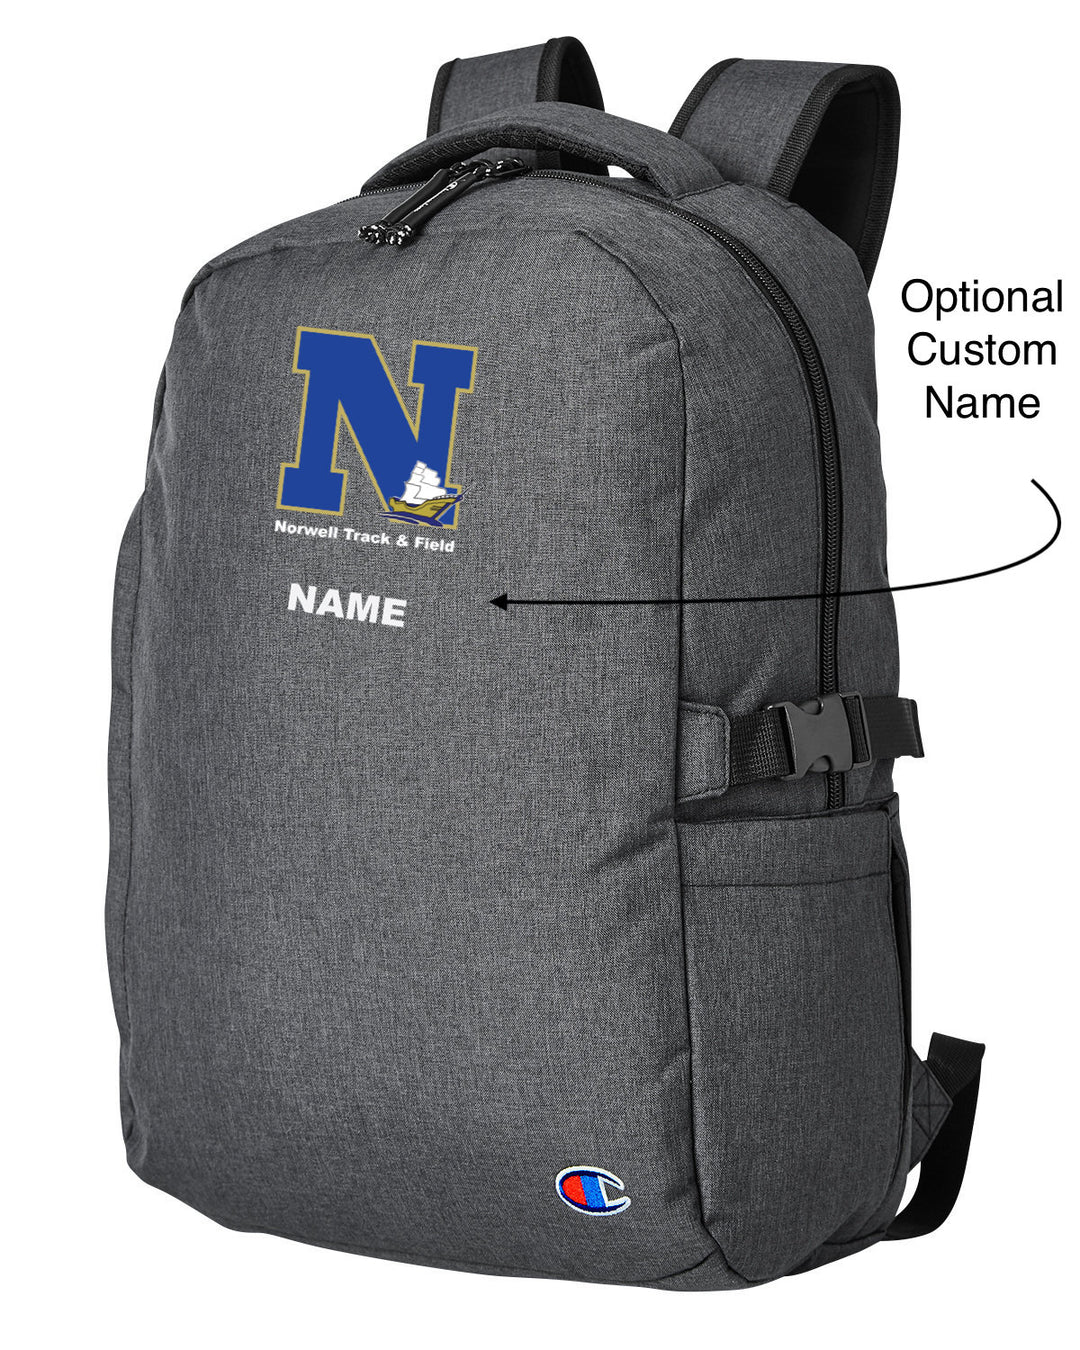 Norwell Track & Field Champion Backpack (CA1004)